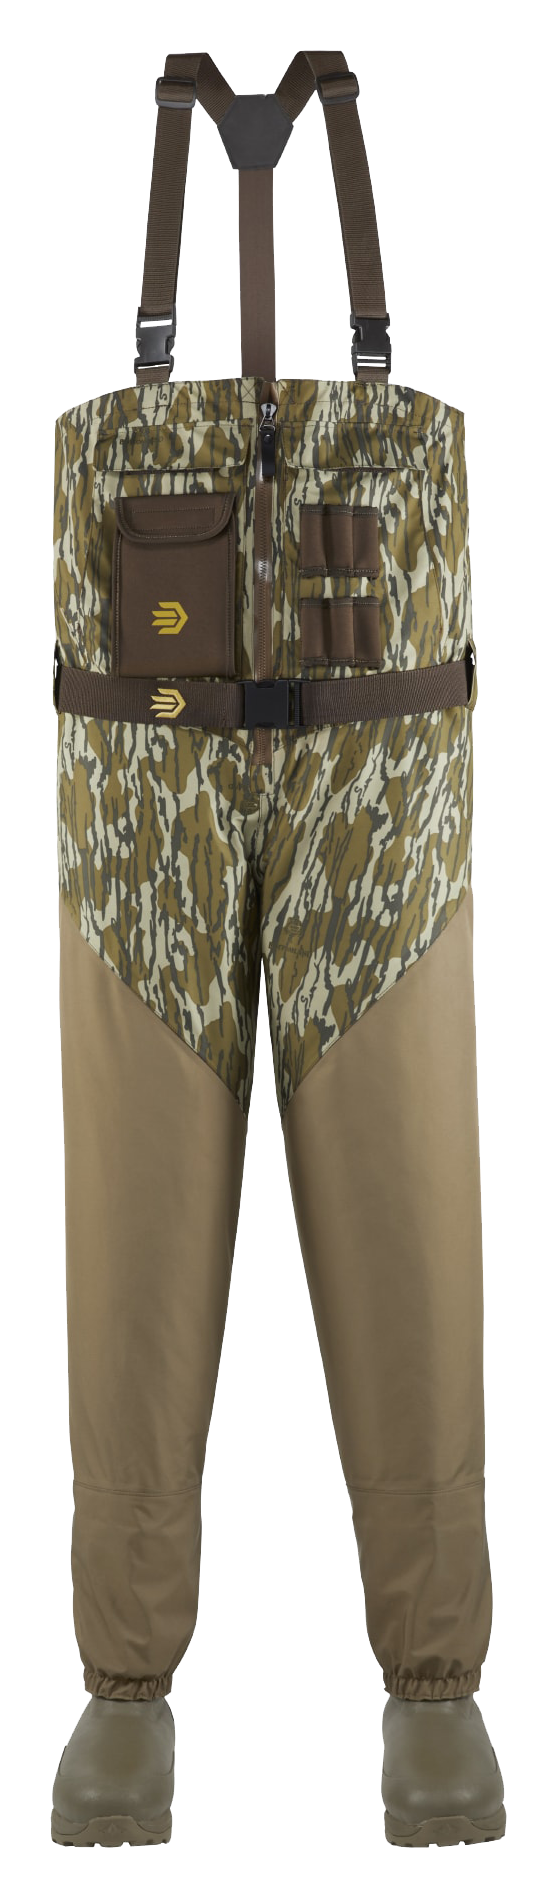 LaCrosse Alpha Agility Select Insulated Front-Zip Breathable Hunting Waders for Men - Mossy Oak Original Bottomland - 8/Medium